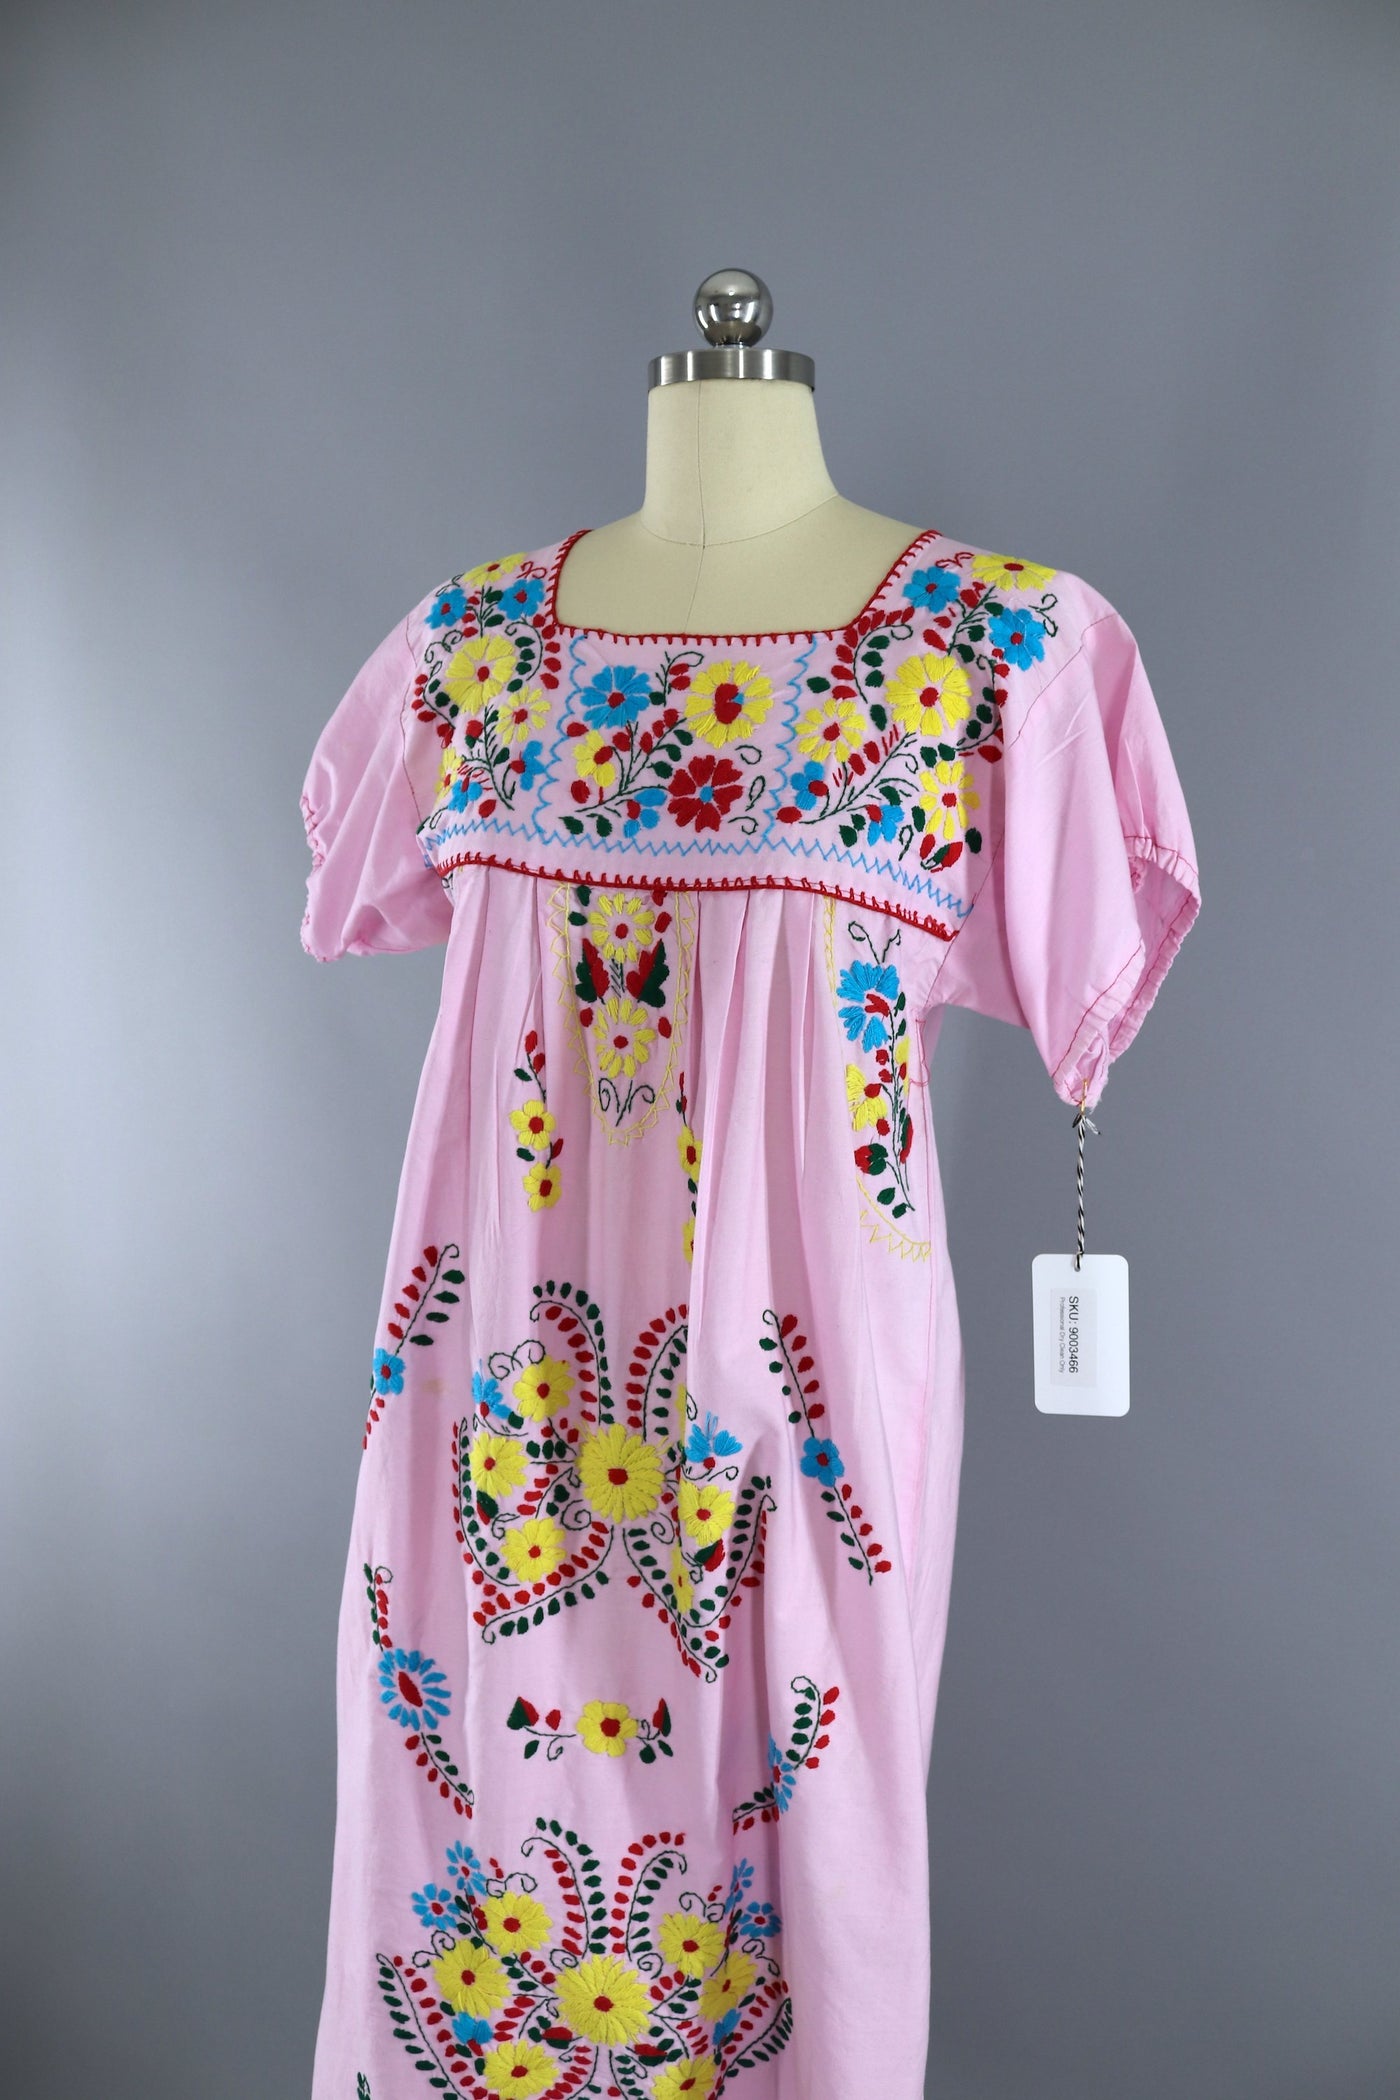 Pastel Pink Vintage Mexican Dress / Oaxacan Embroidered Caftan - ThisBlueBird